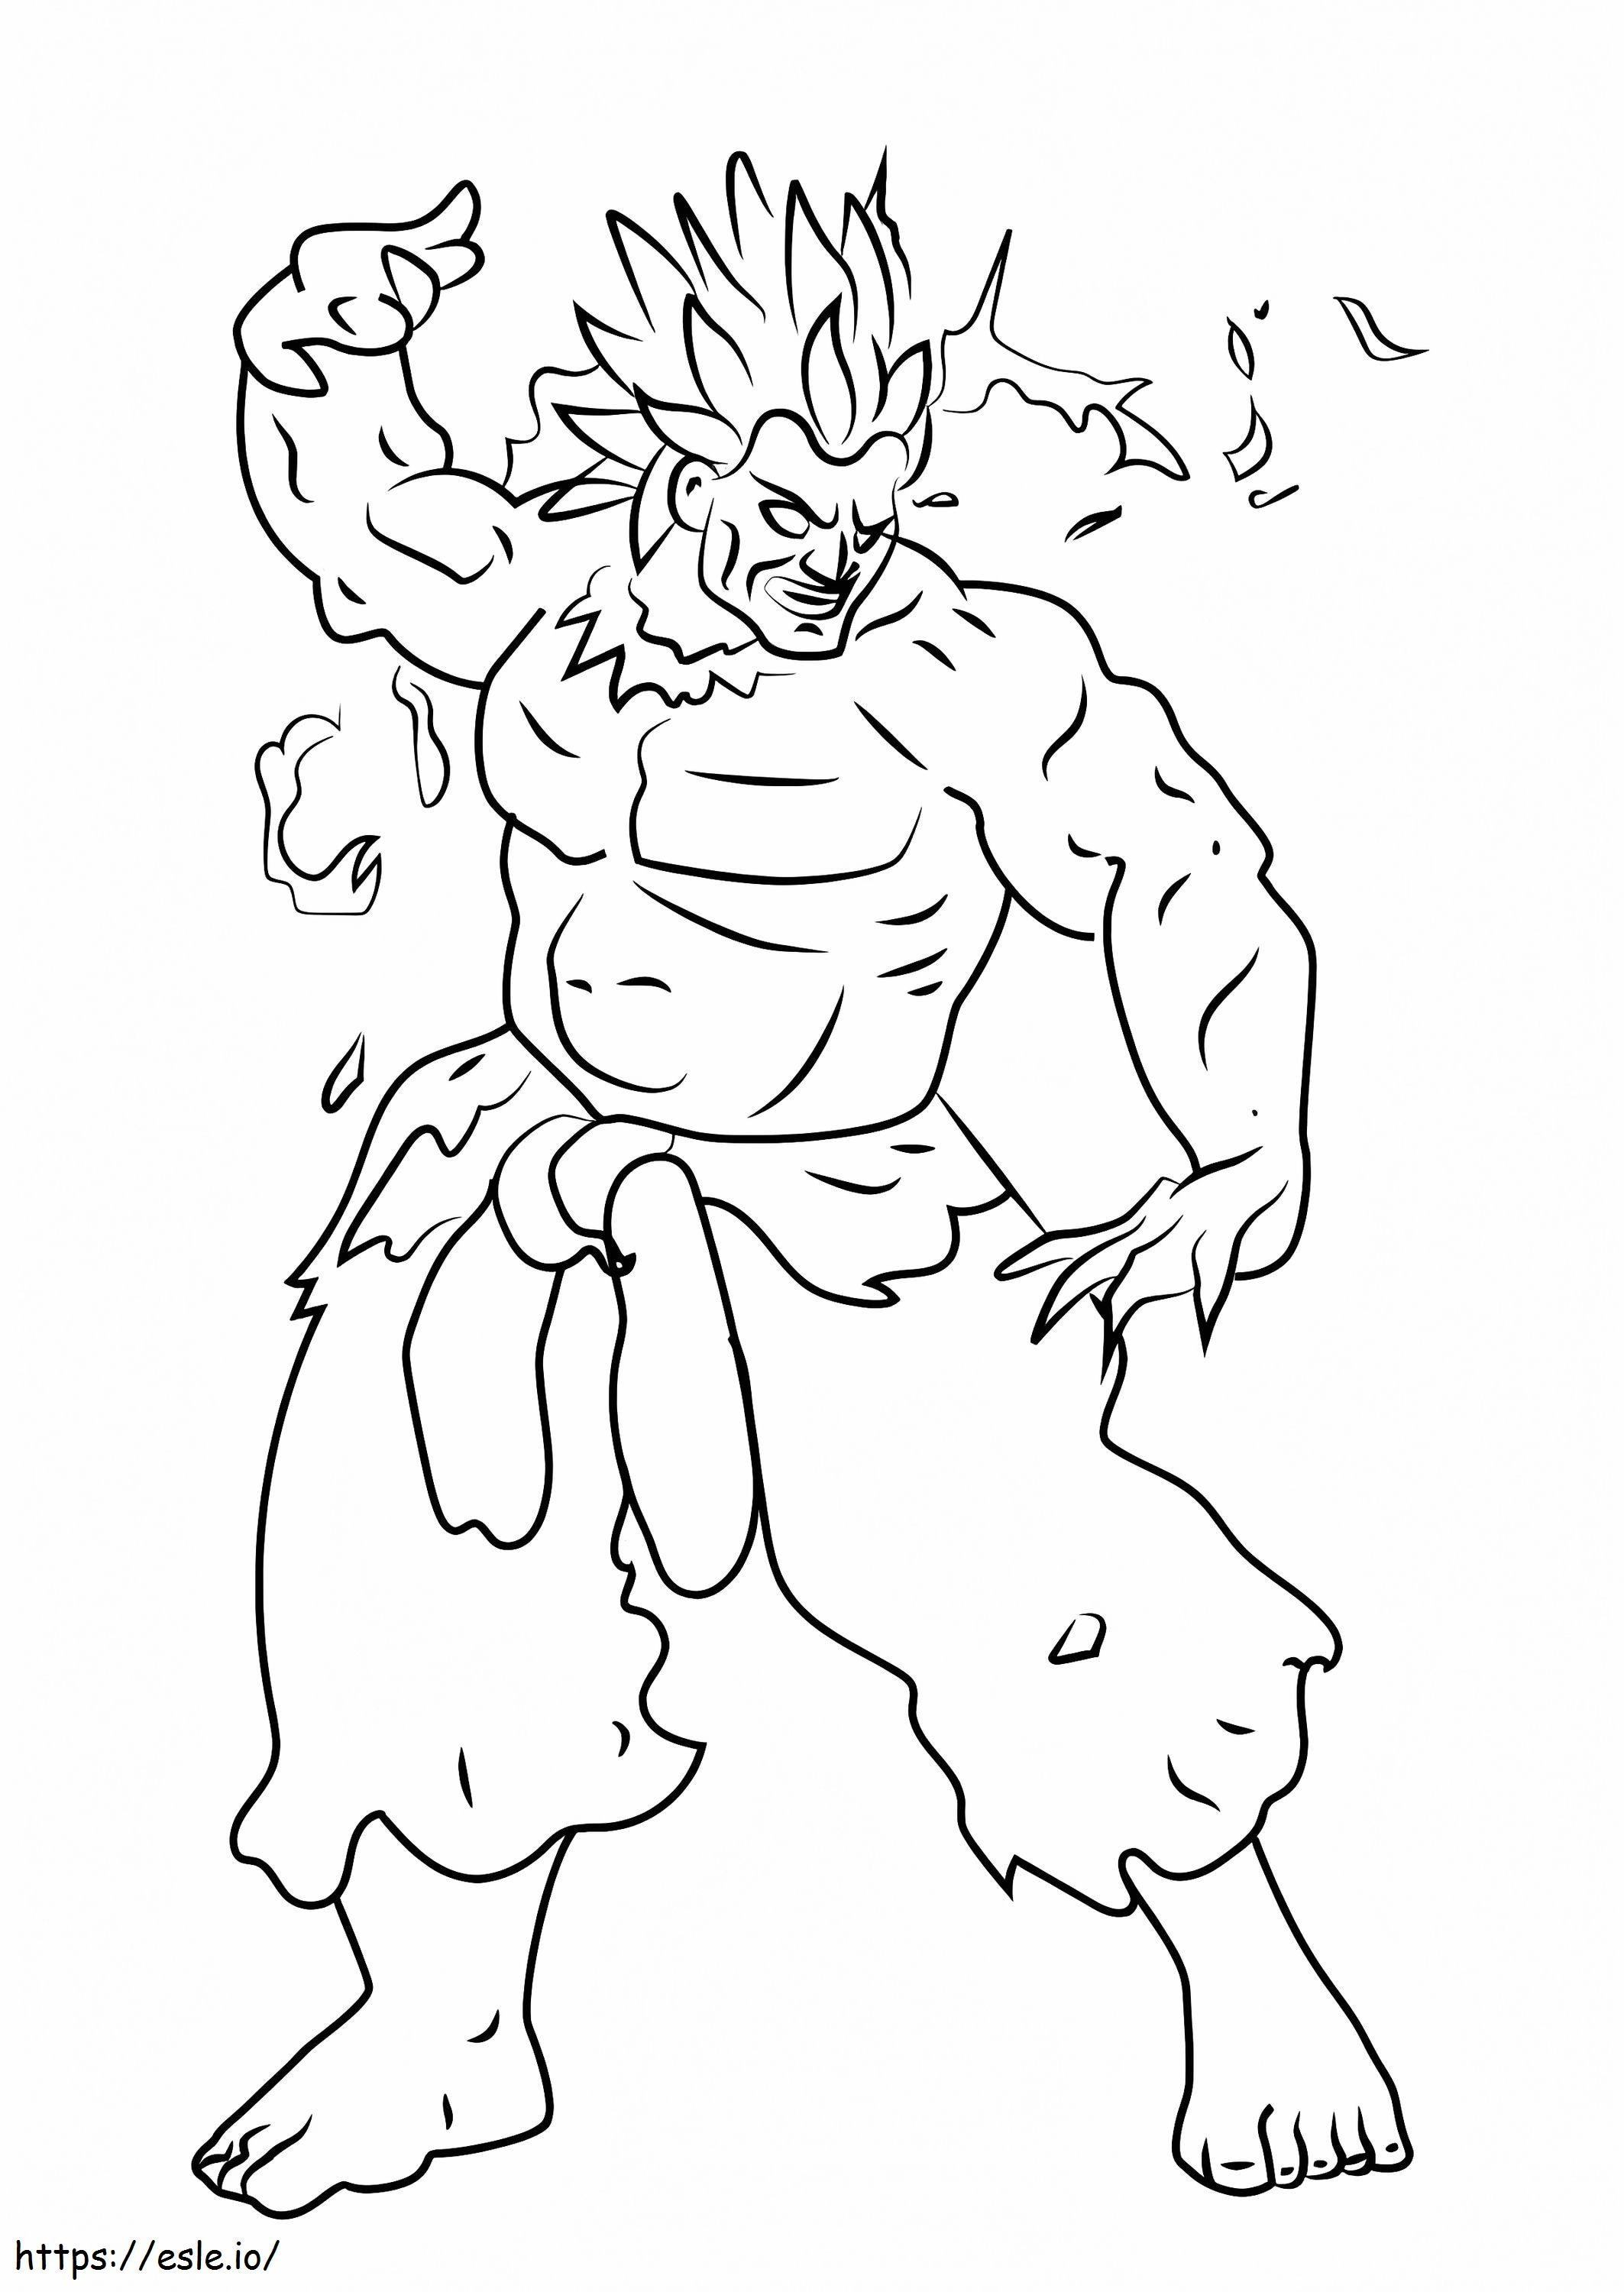 Oni From Street Fighter coloring page